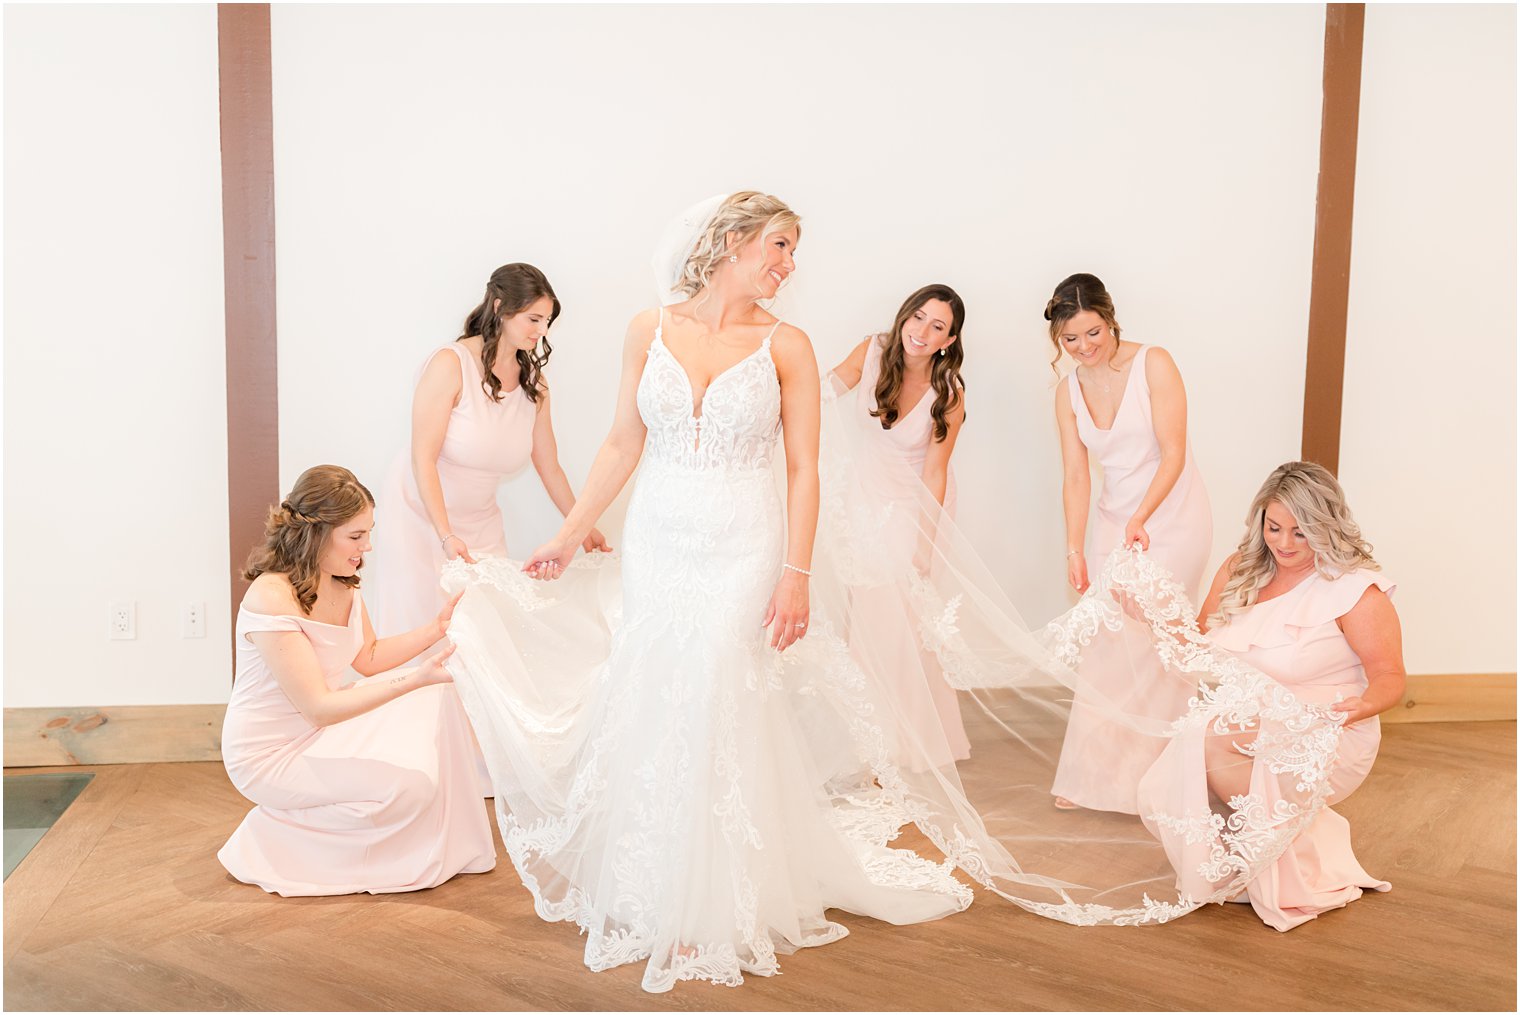 bridesmaids helping bride into her wedding dress and cathedral veil at Renault Winery in Egg Harbor Twp NJ